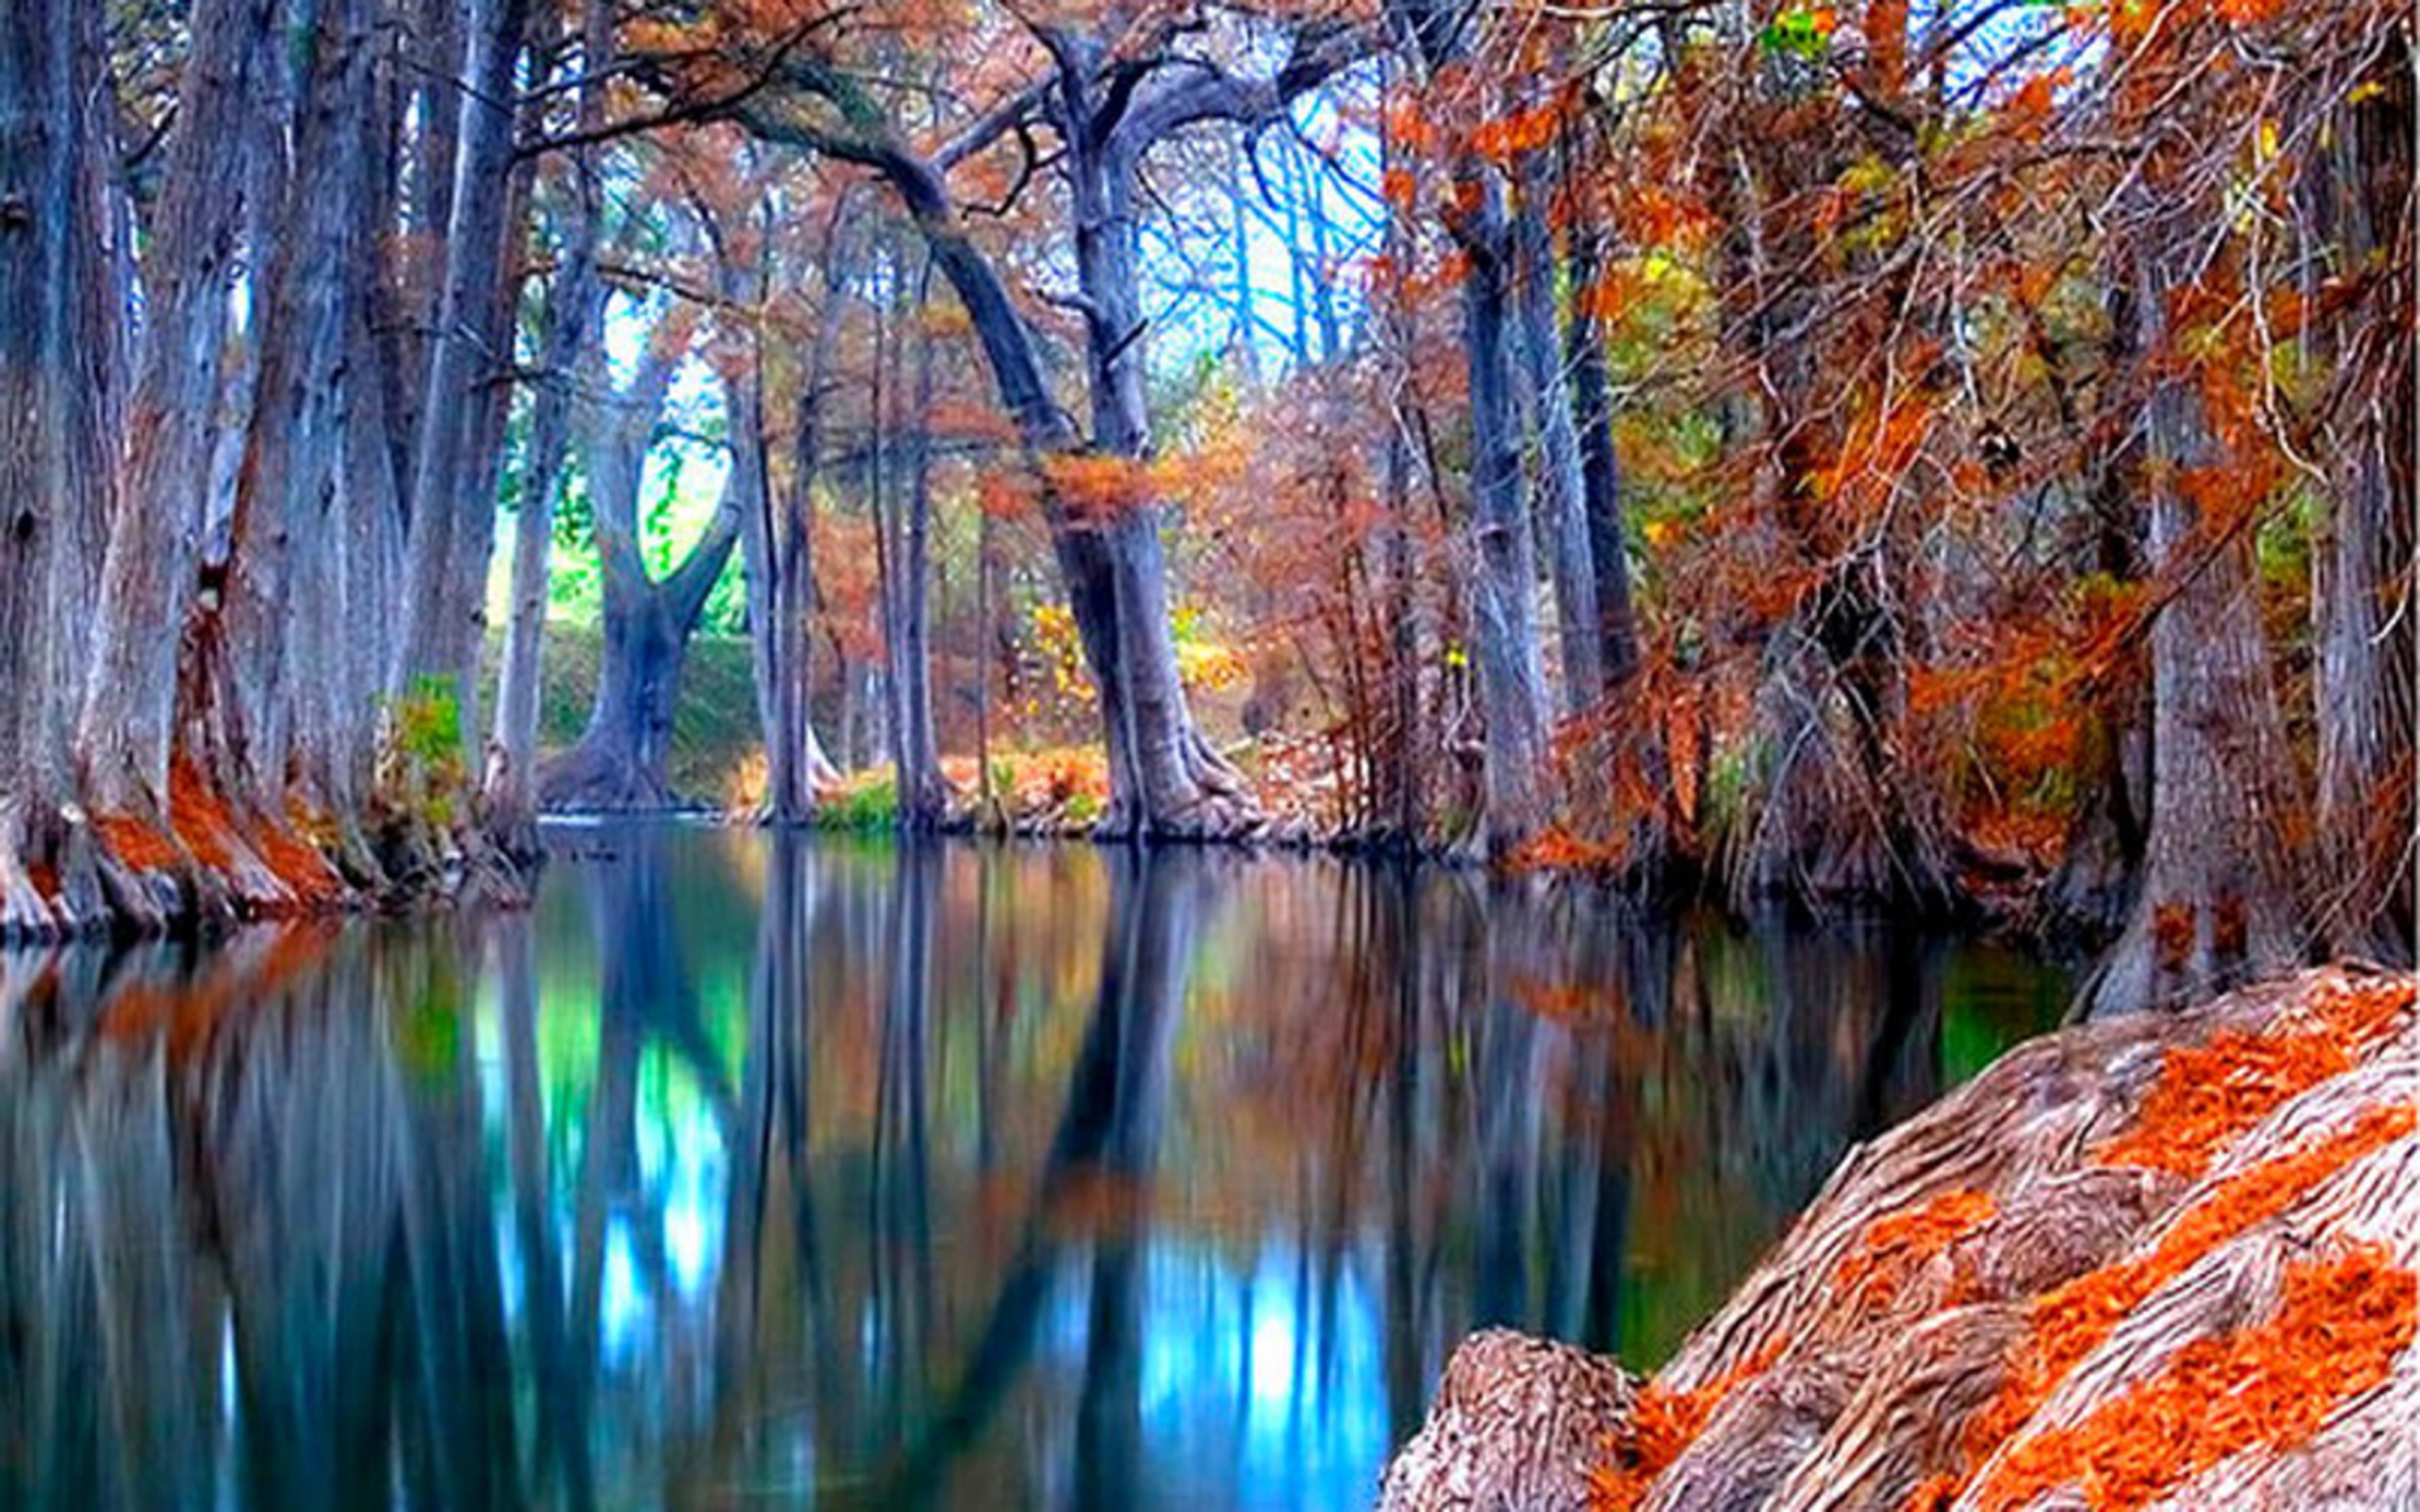 Nature Autumn Stream Backgrounds Wallpapers : Wallpapers13.com